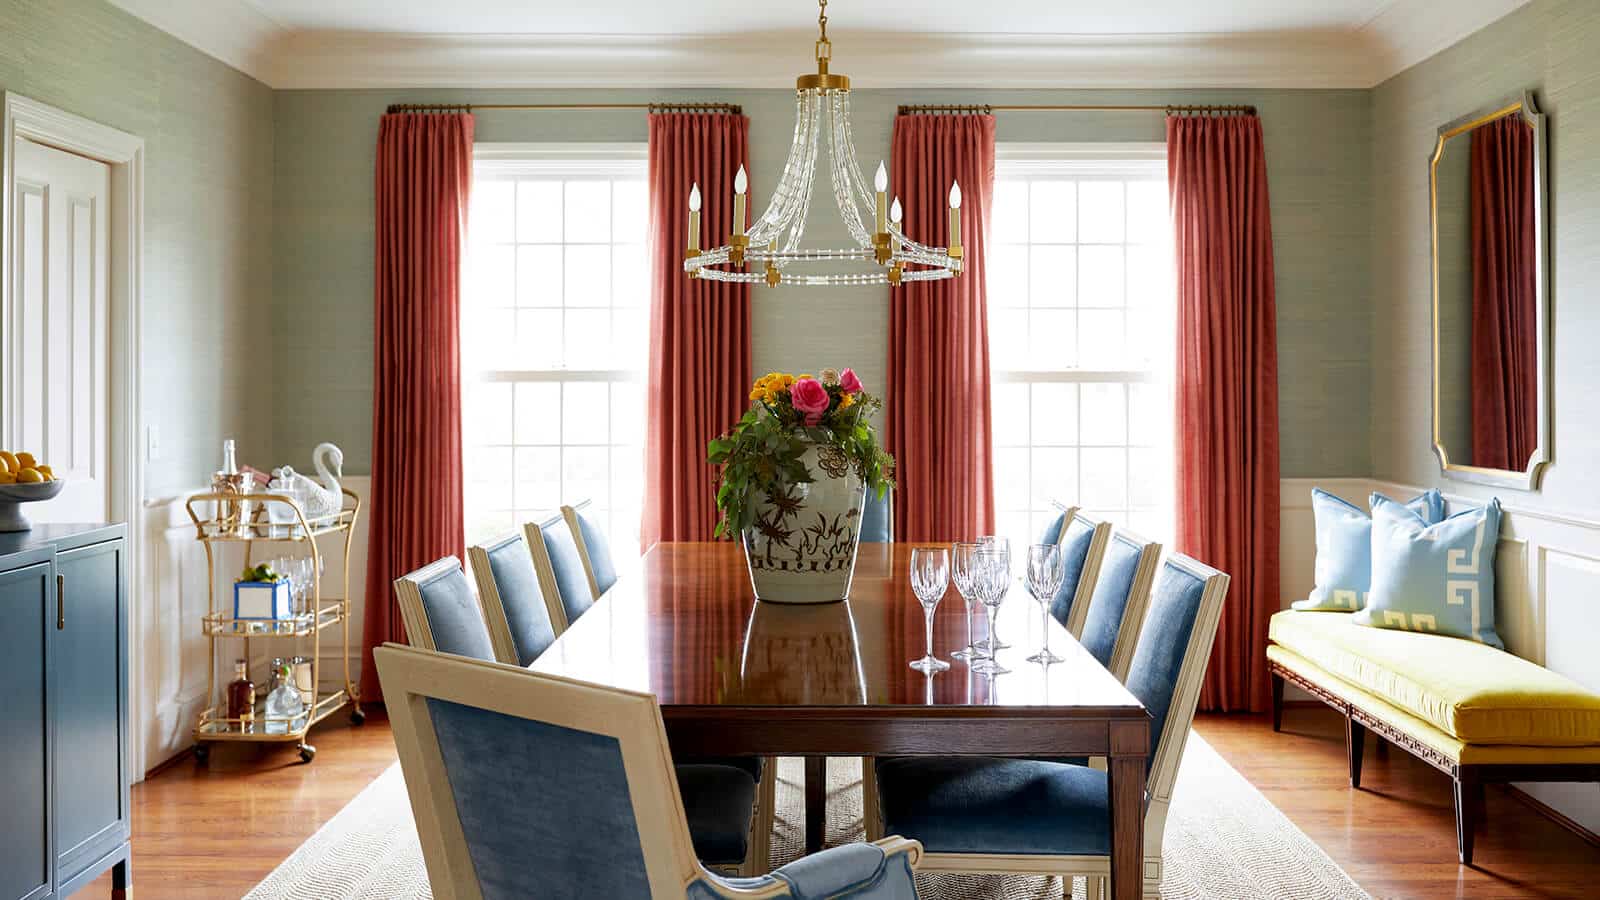 Dining room with blue chairs